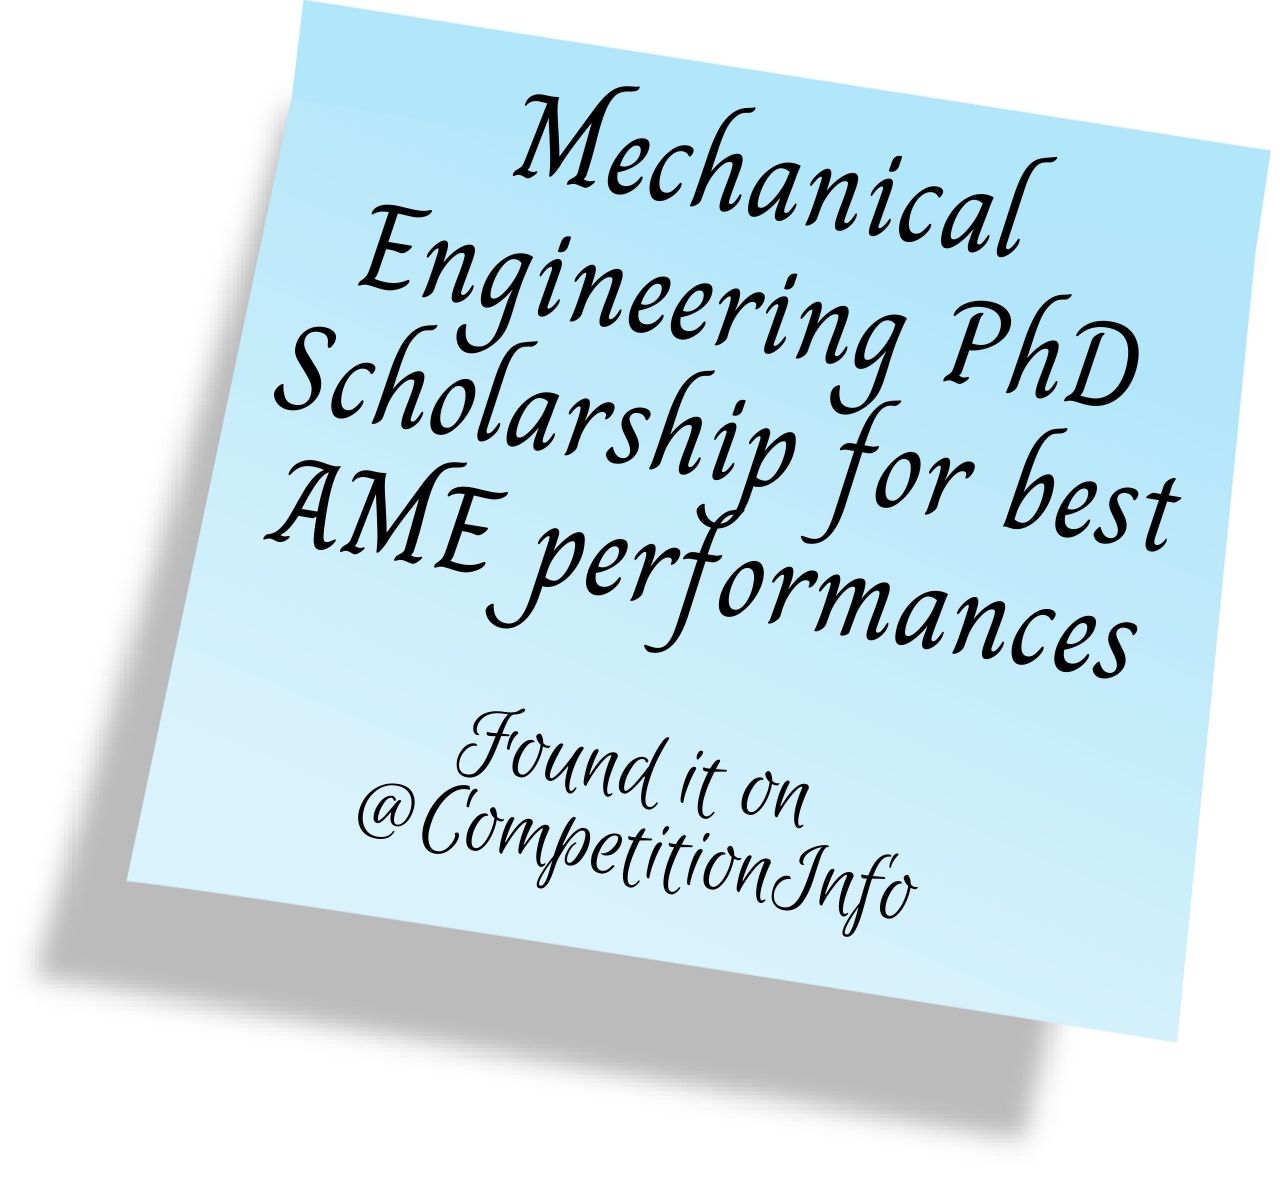 Mechanical Engineering PhD Scholarship for best AME performances